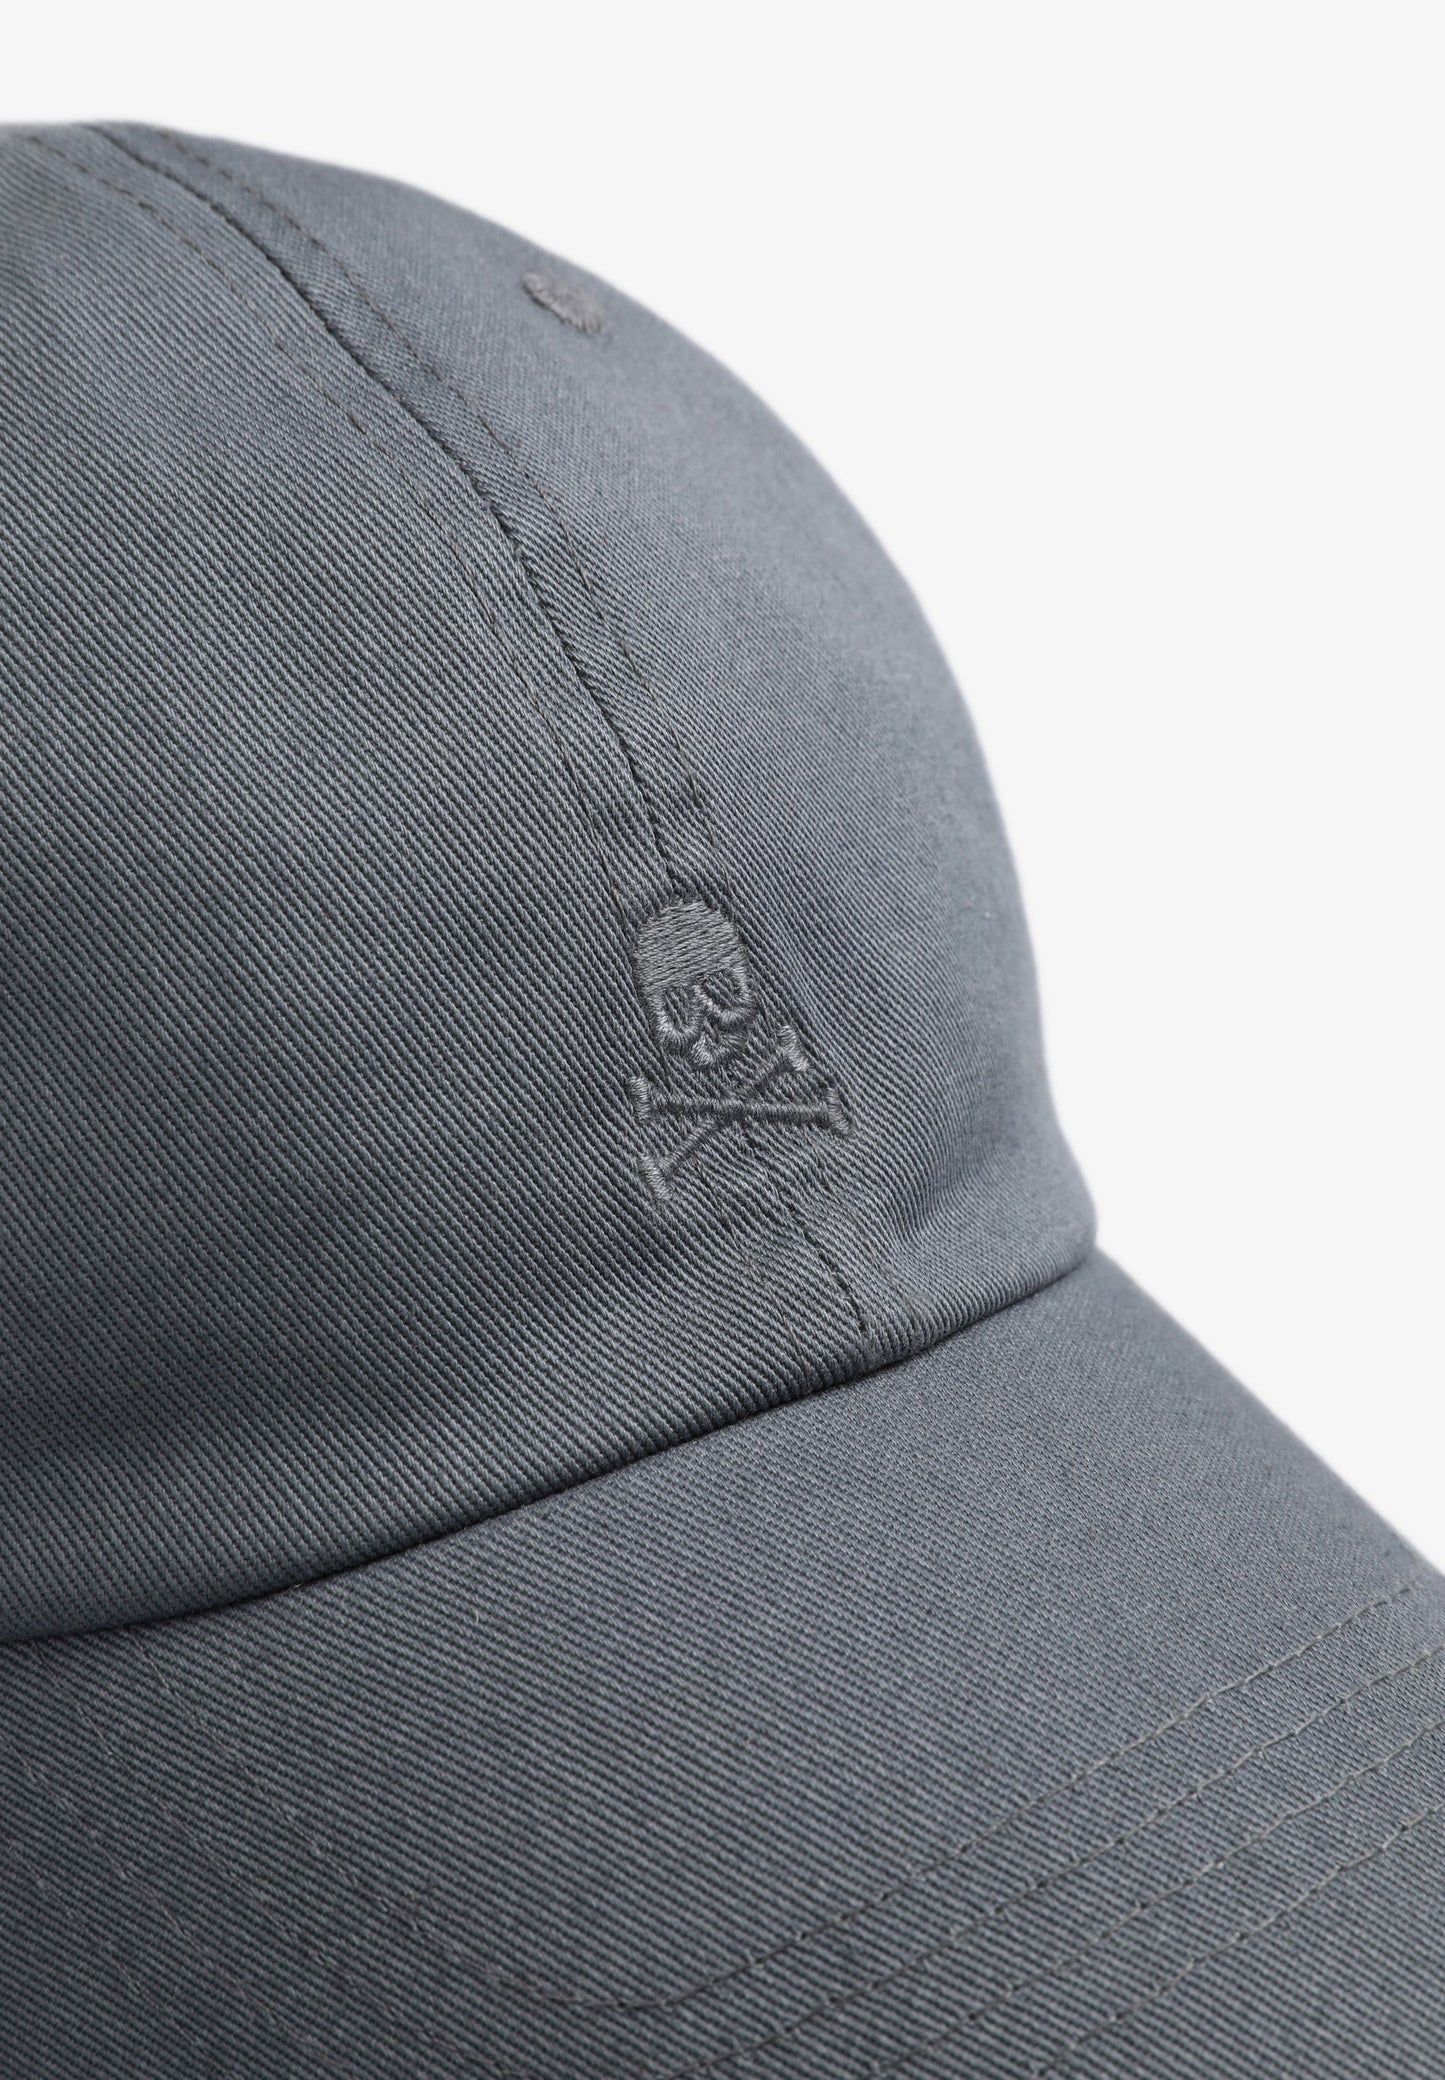 SKULL CAP WITH MATCHING EMBROIDERY